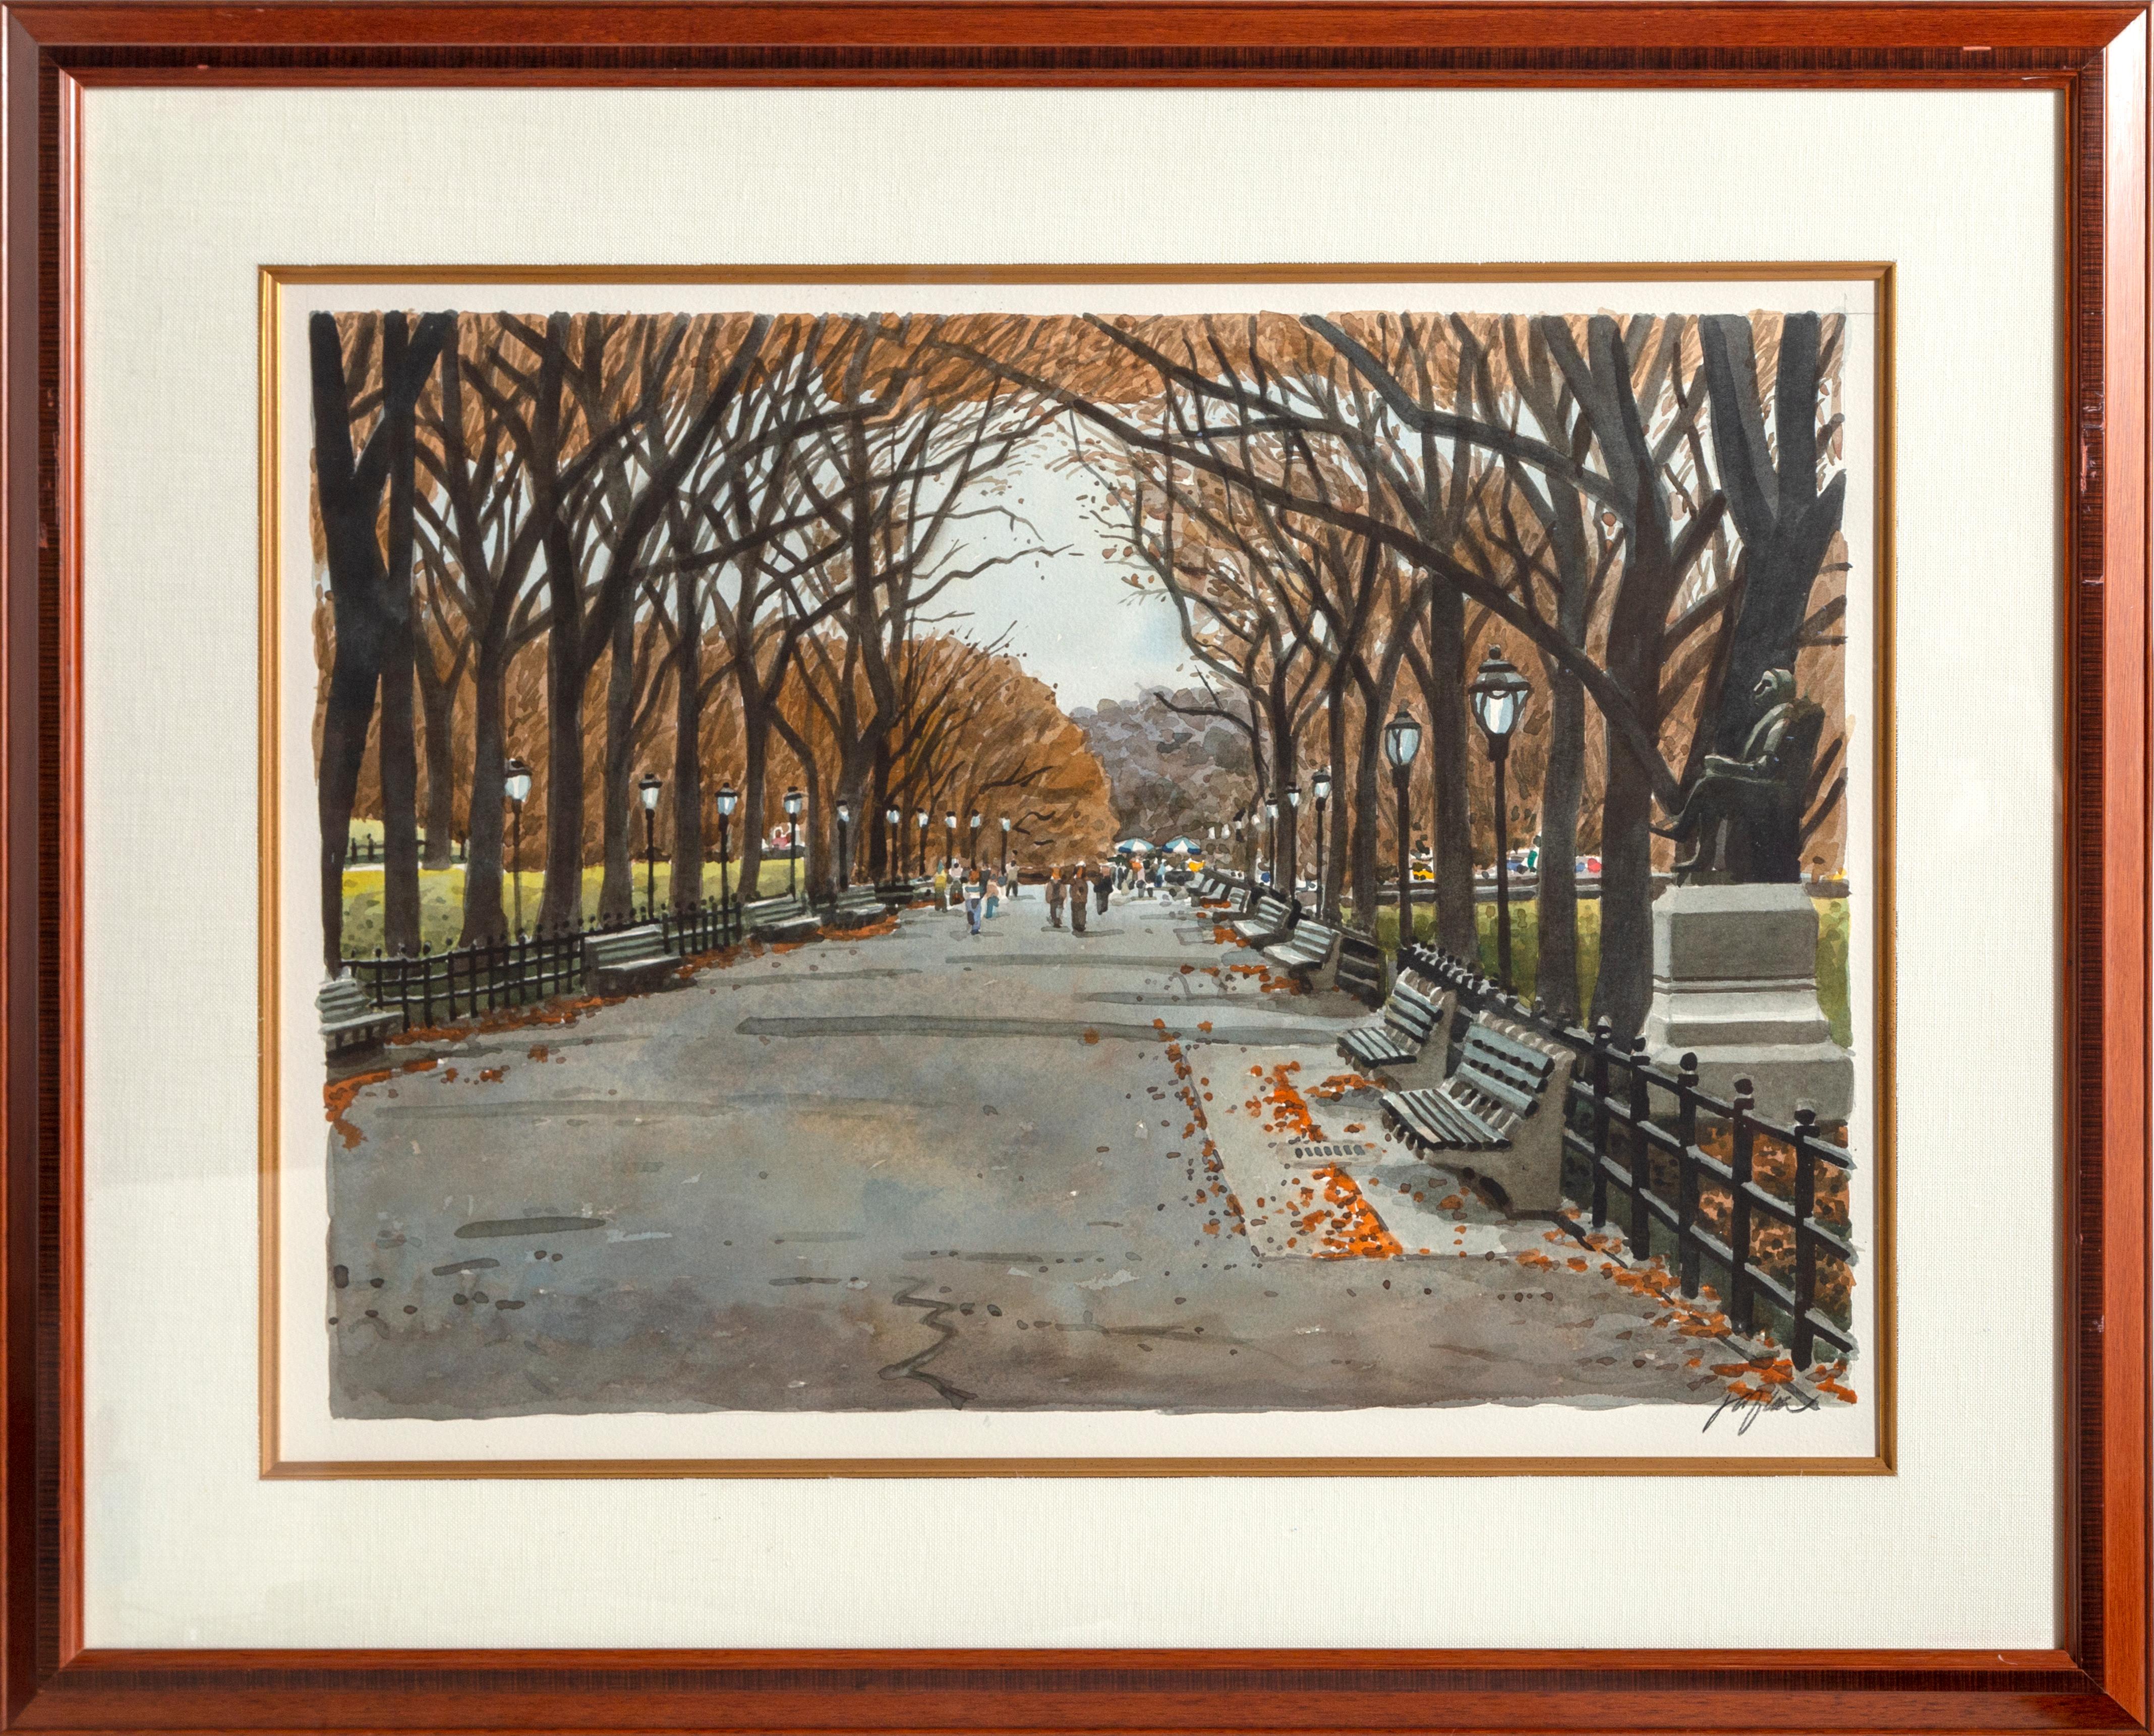 Central Park in Fall, Framed Photorealist Watercolor Painting